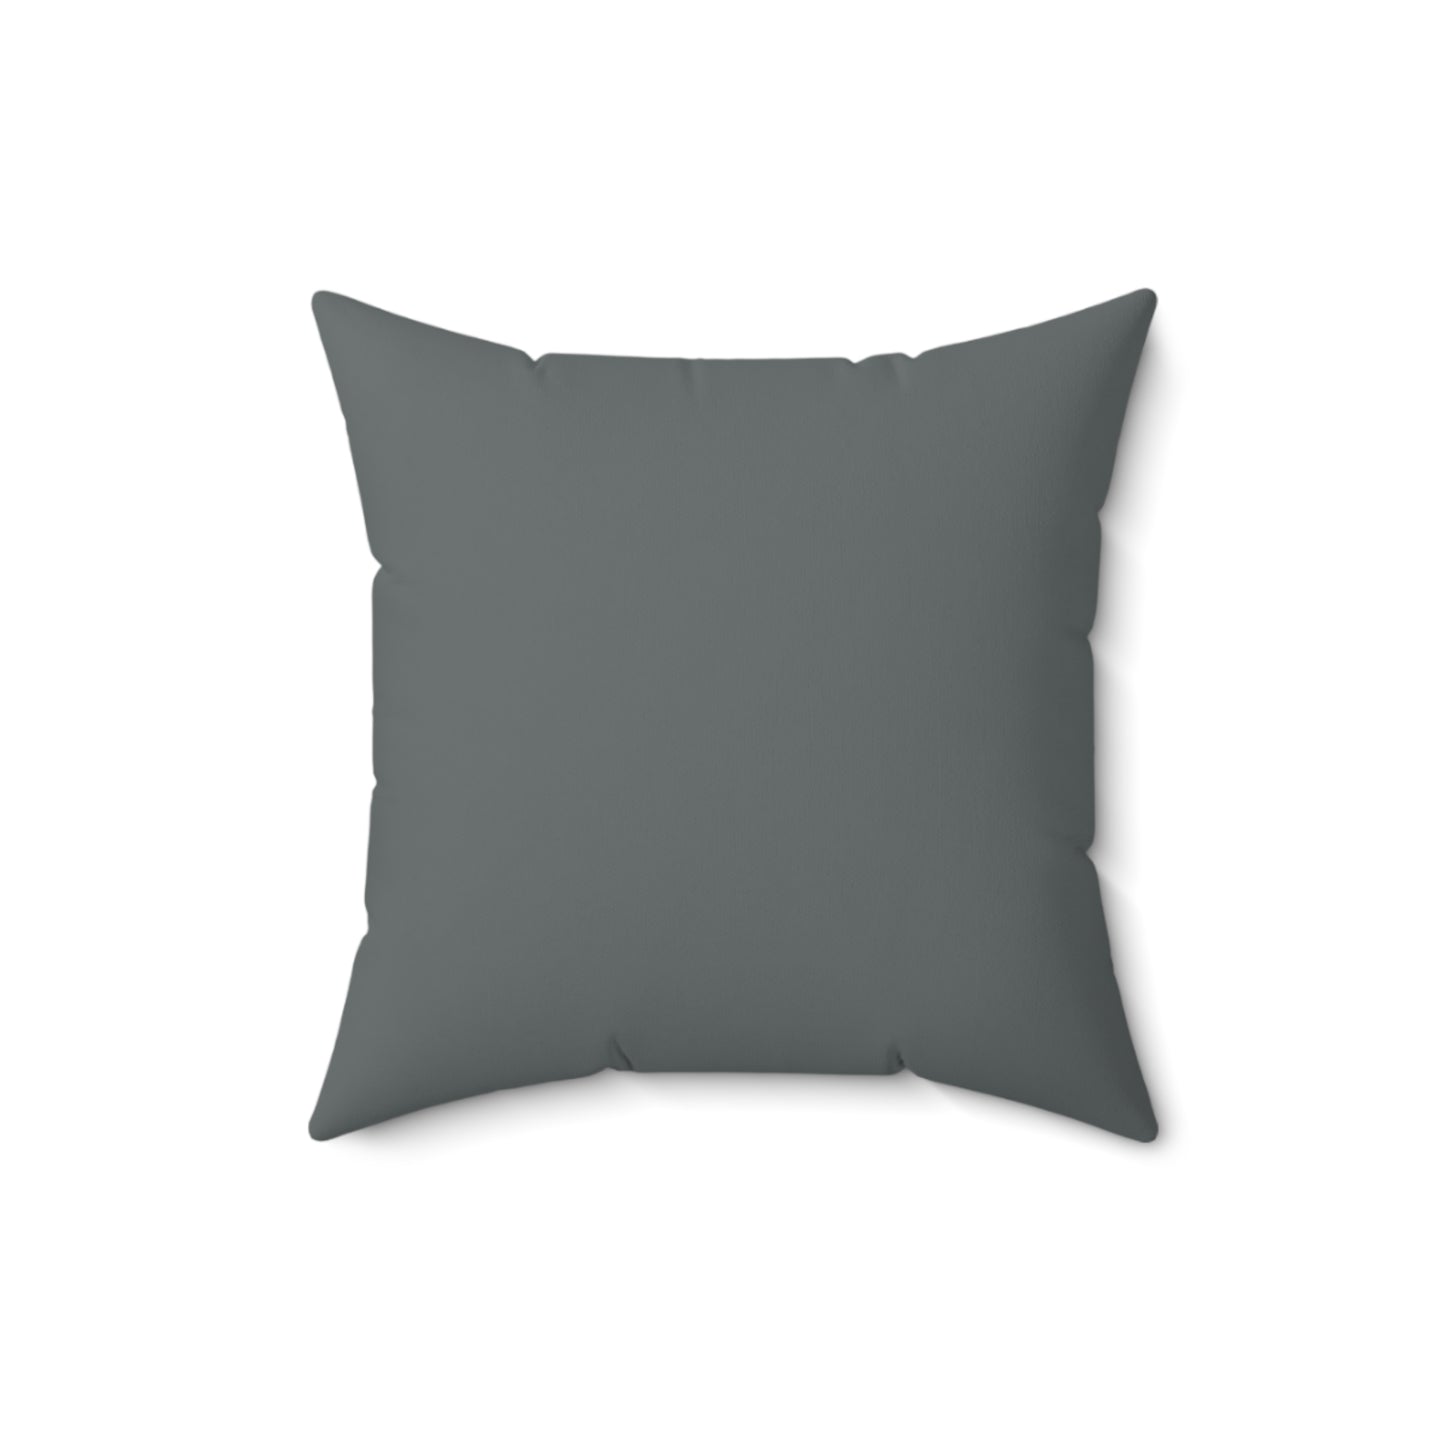 The Chaplain's Pillow, Gray. Chaplain Gifts by Chaplain Life®